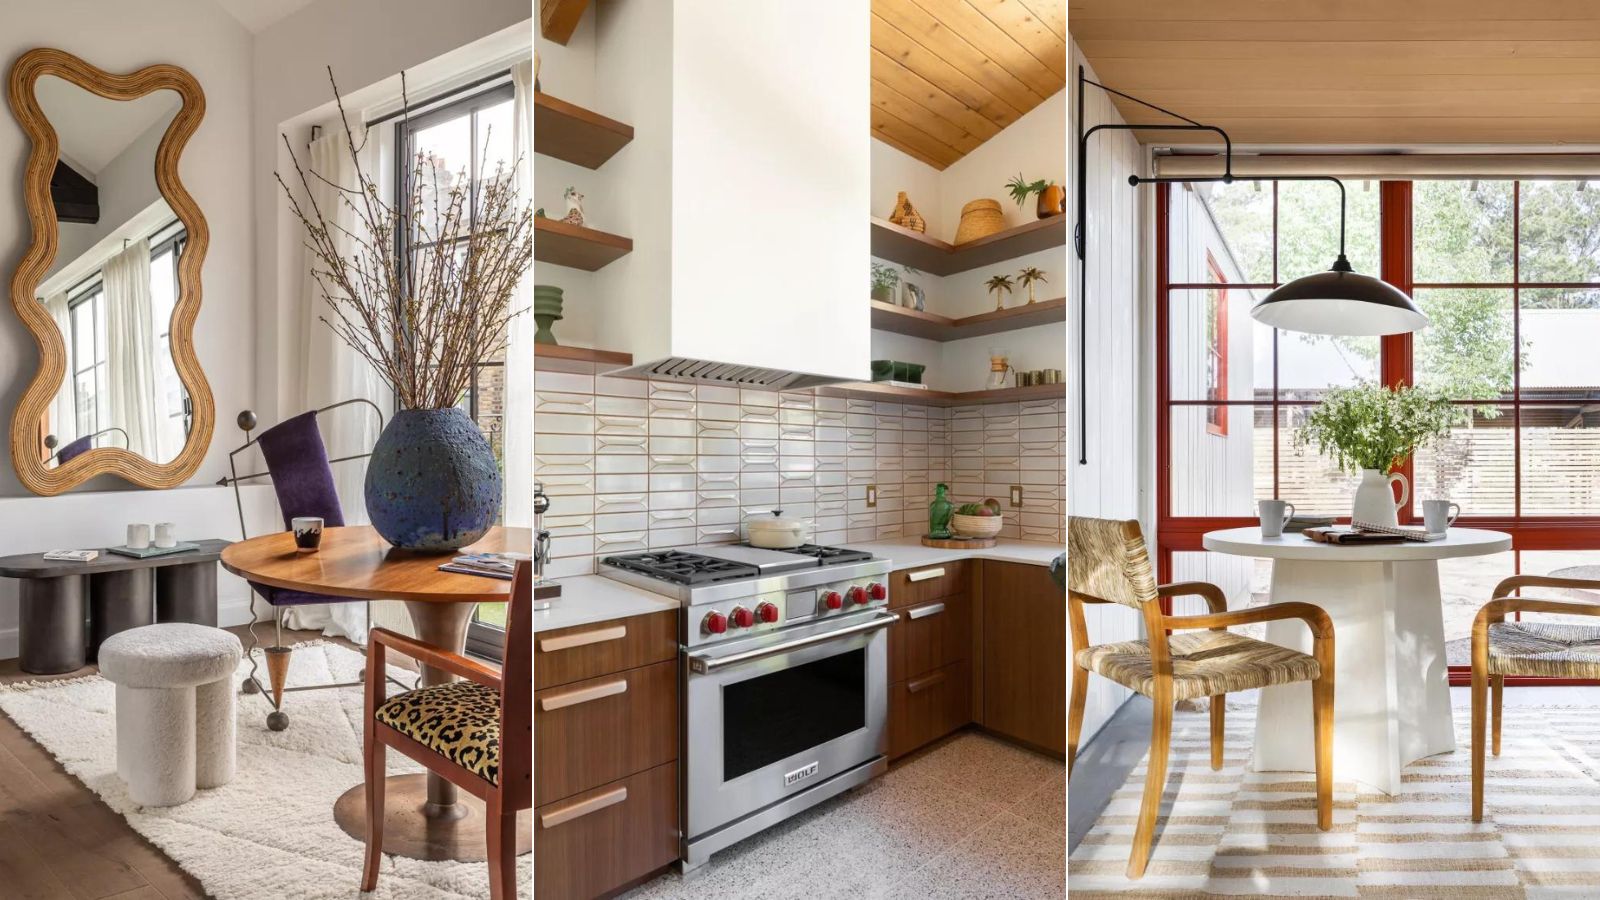 10 mid-century modern ideas to convince you this style is always on trend